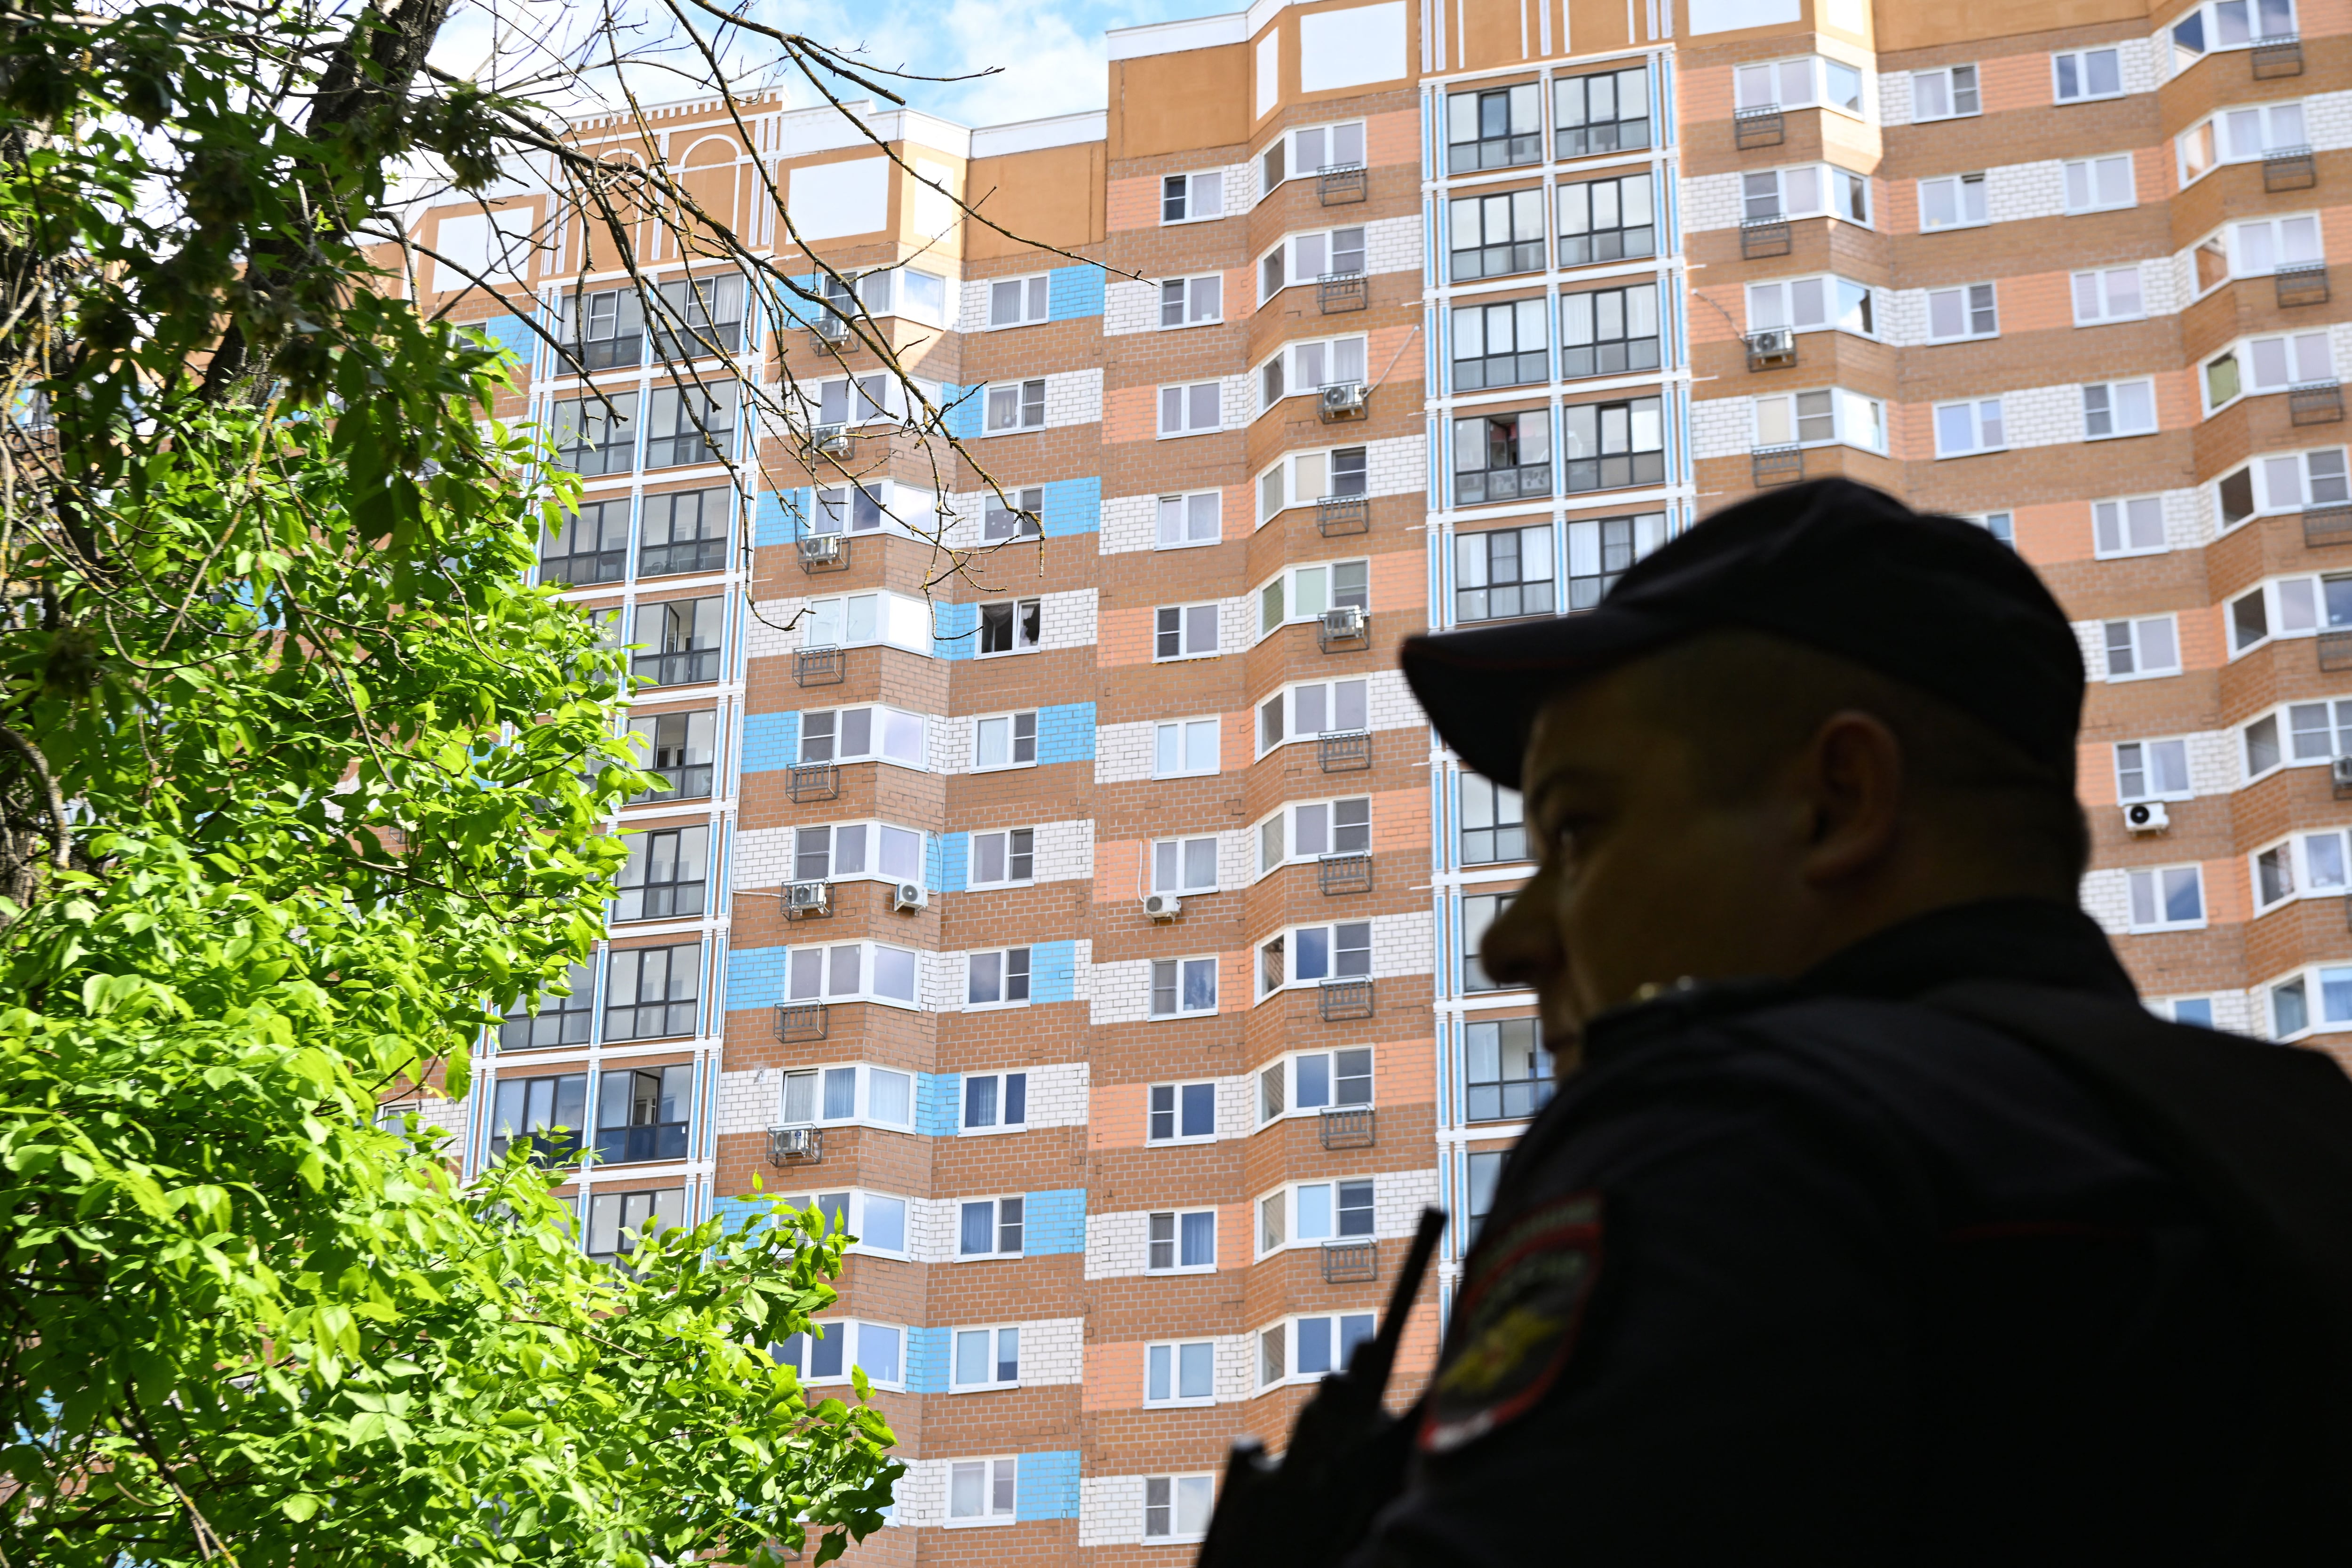 A police officer stands guard outside a multi-story apartment building after a drone strike in Moscow on May 30, 2023. (Photo by Kirill KUDRYAVTSEV / AFP)